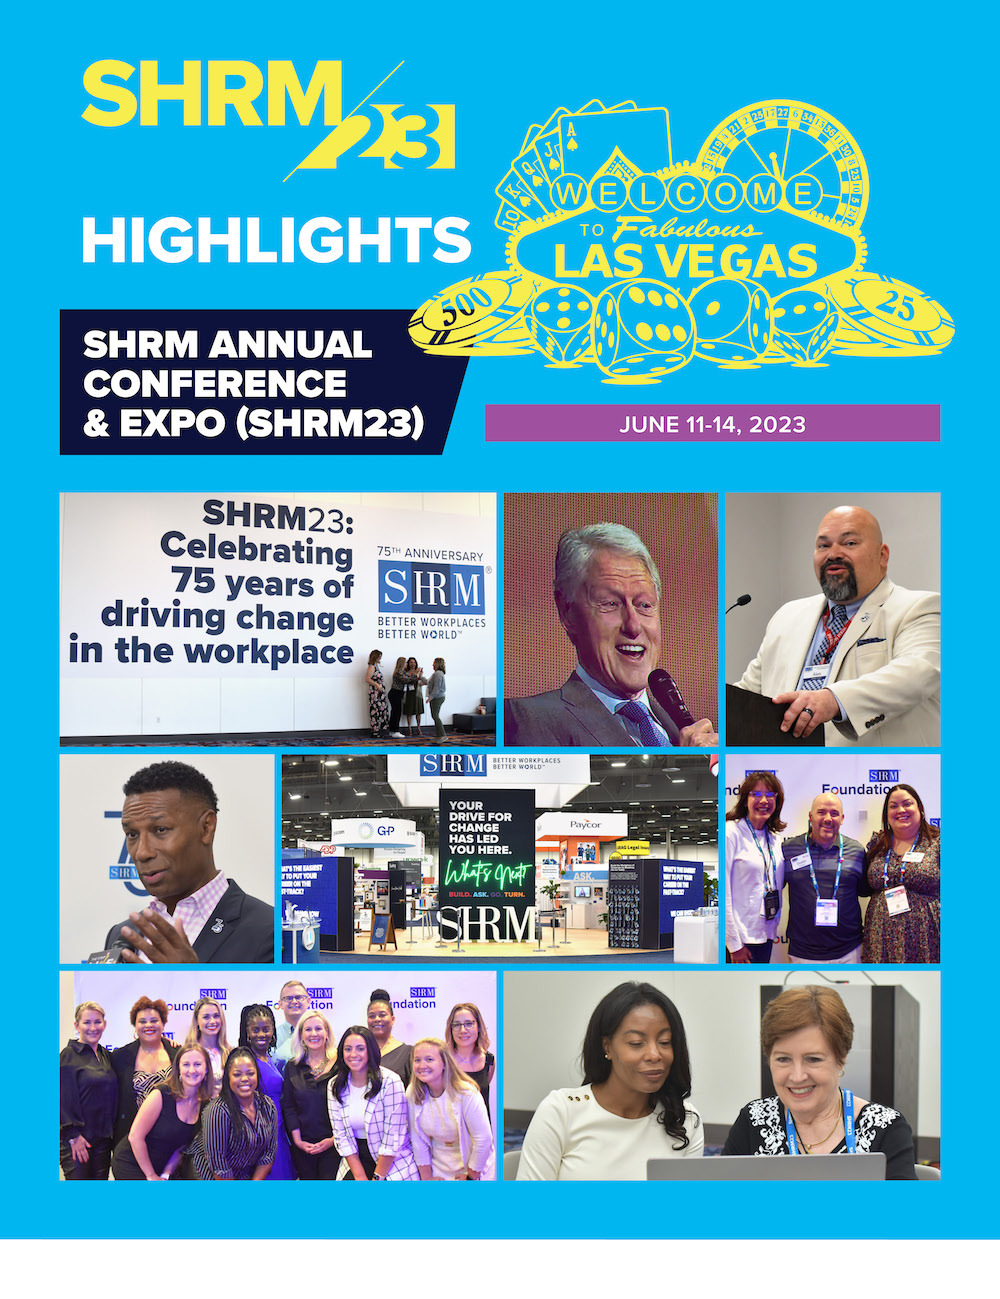 Highlights from SHRM23 75th Anniversary Conference in Las Vegas June 11